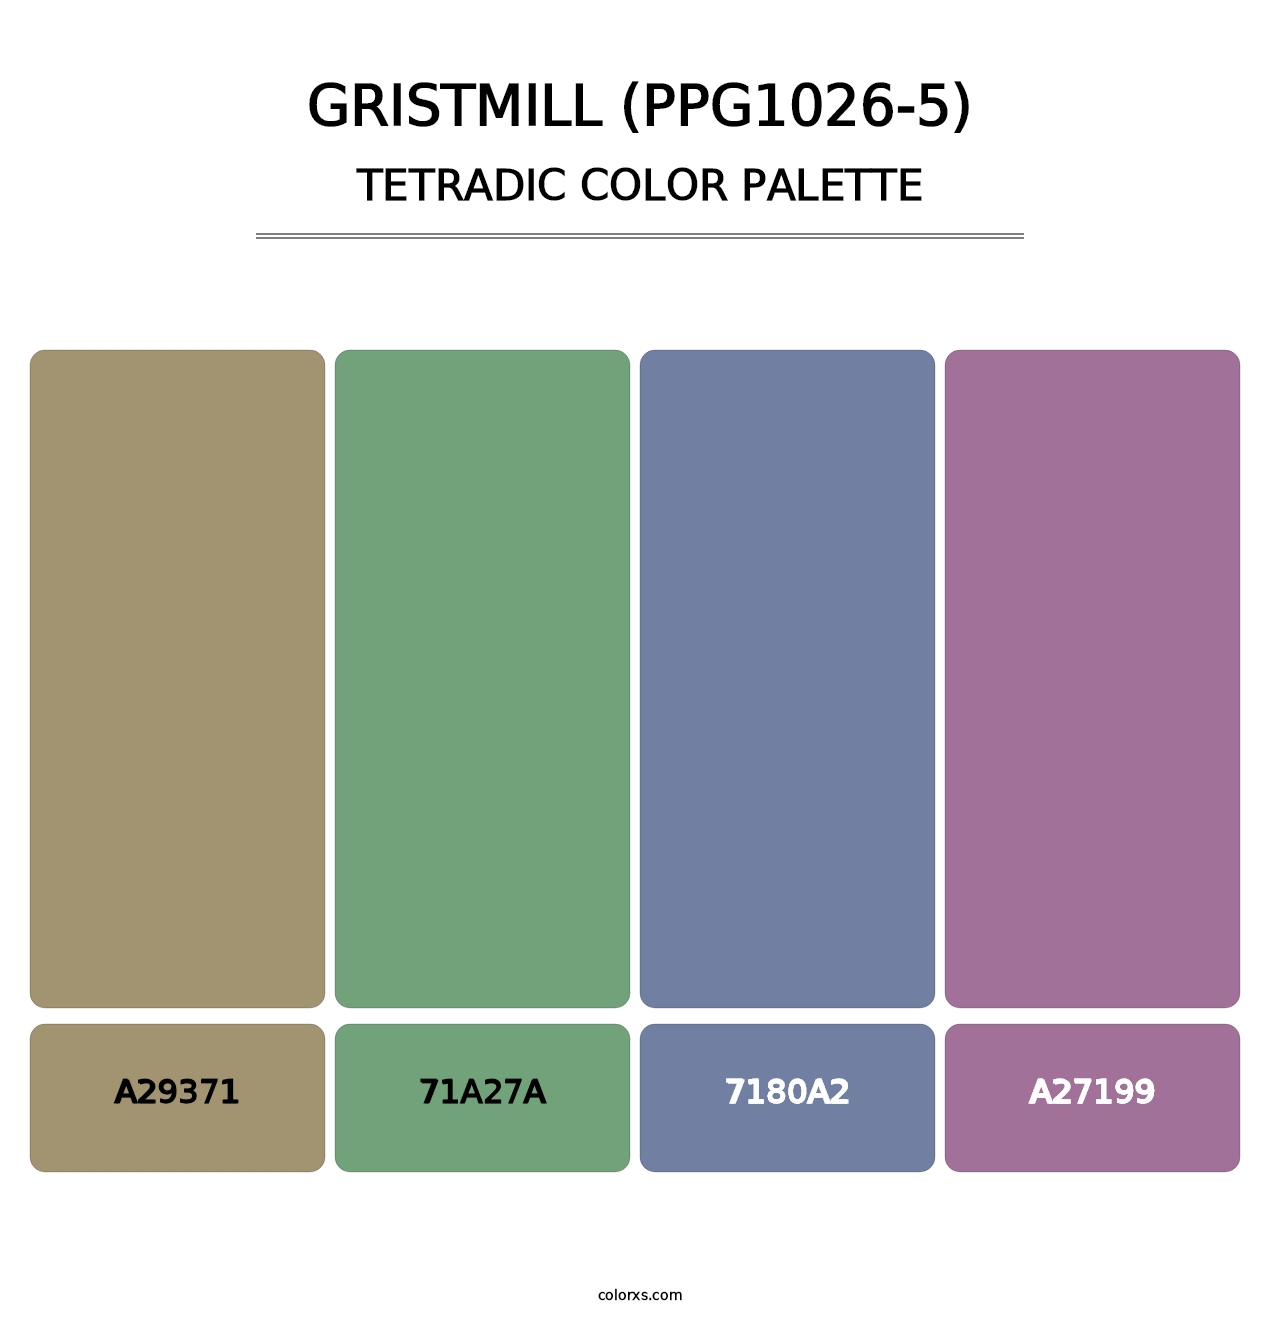 Gristmill (PPG1026-5) - Tetradic Color Palette